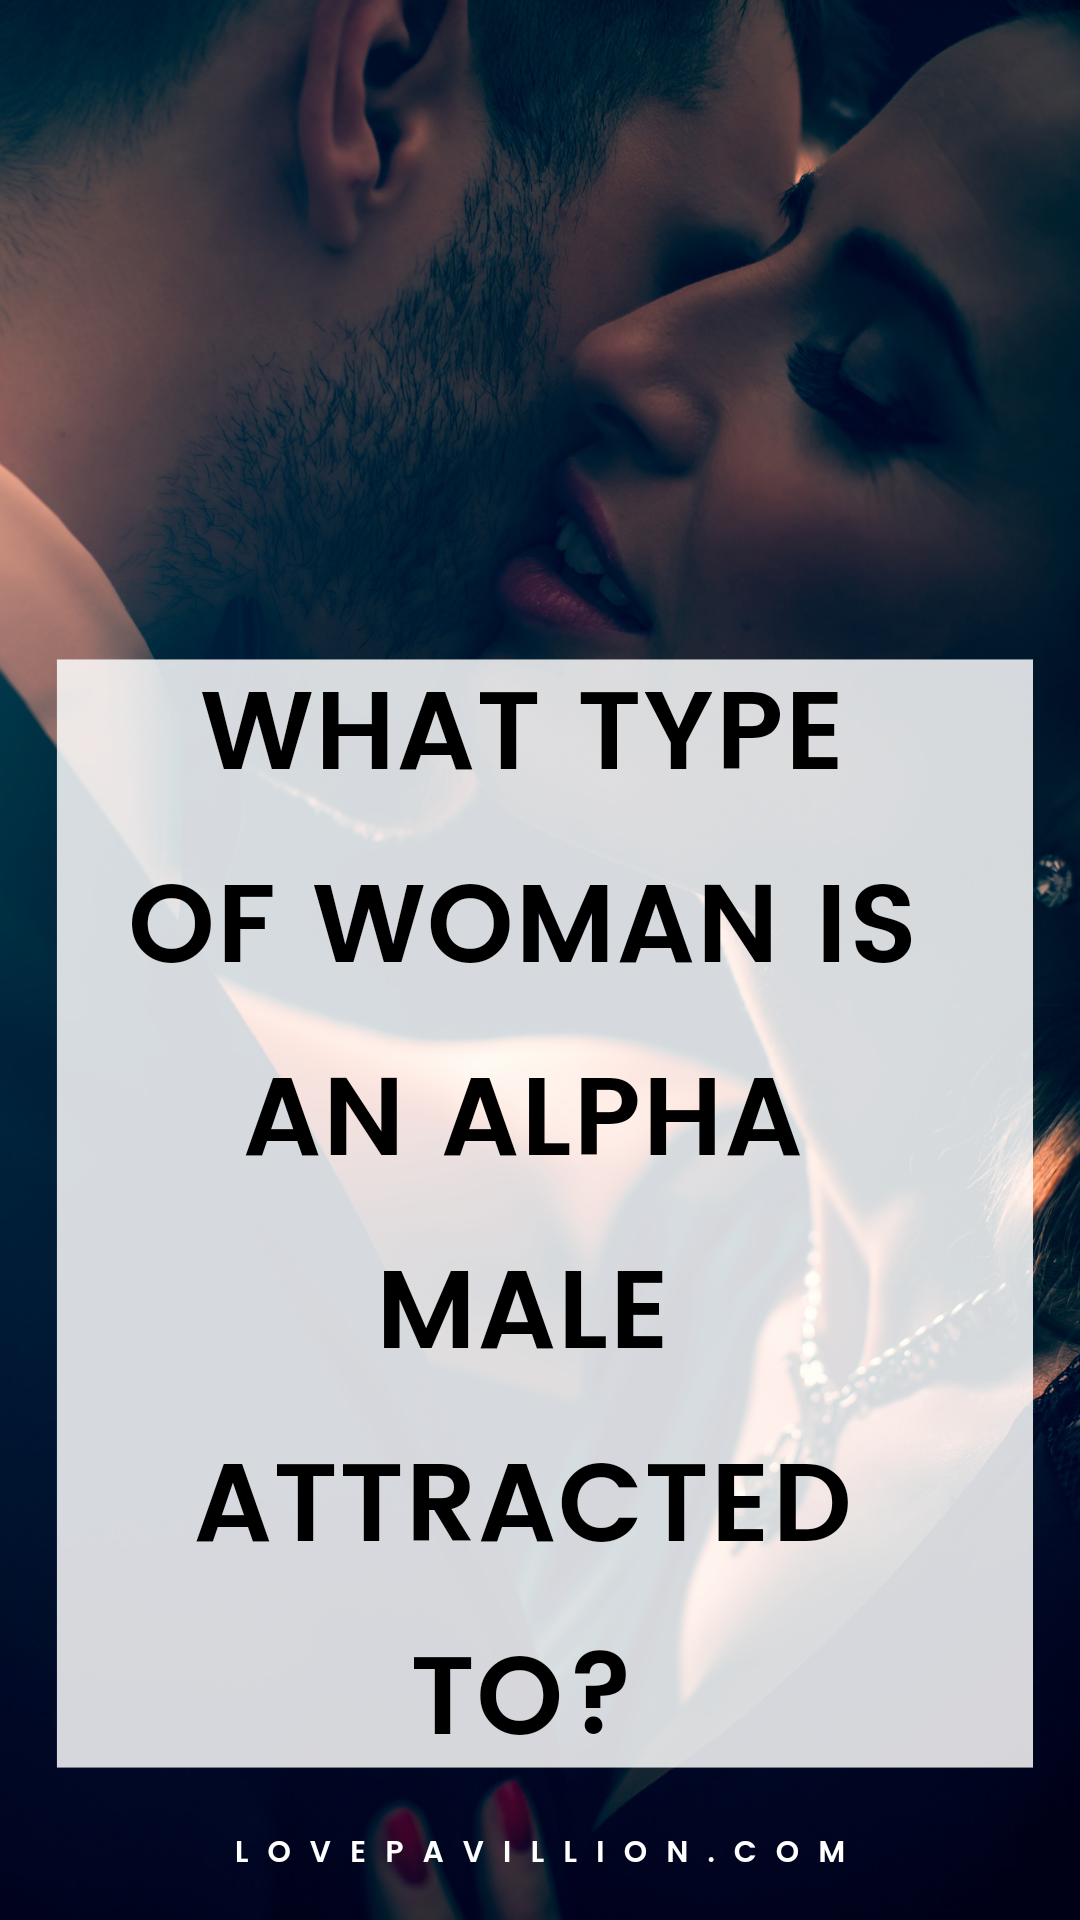 What type of woman is an alpha male attracted to